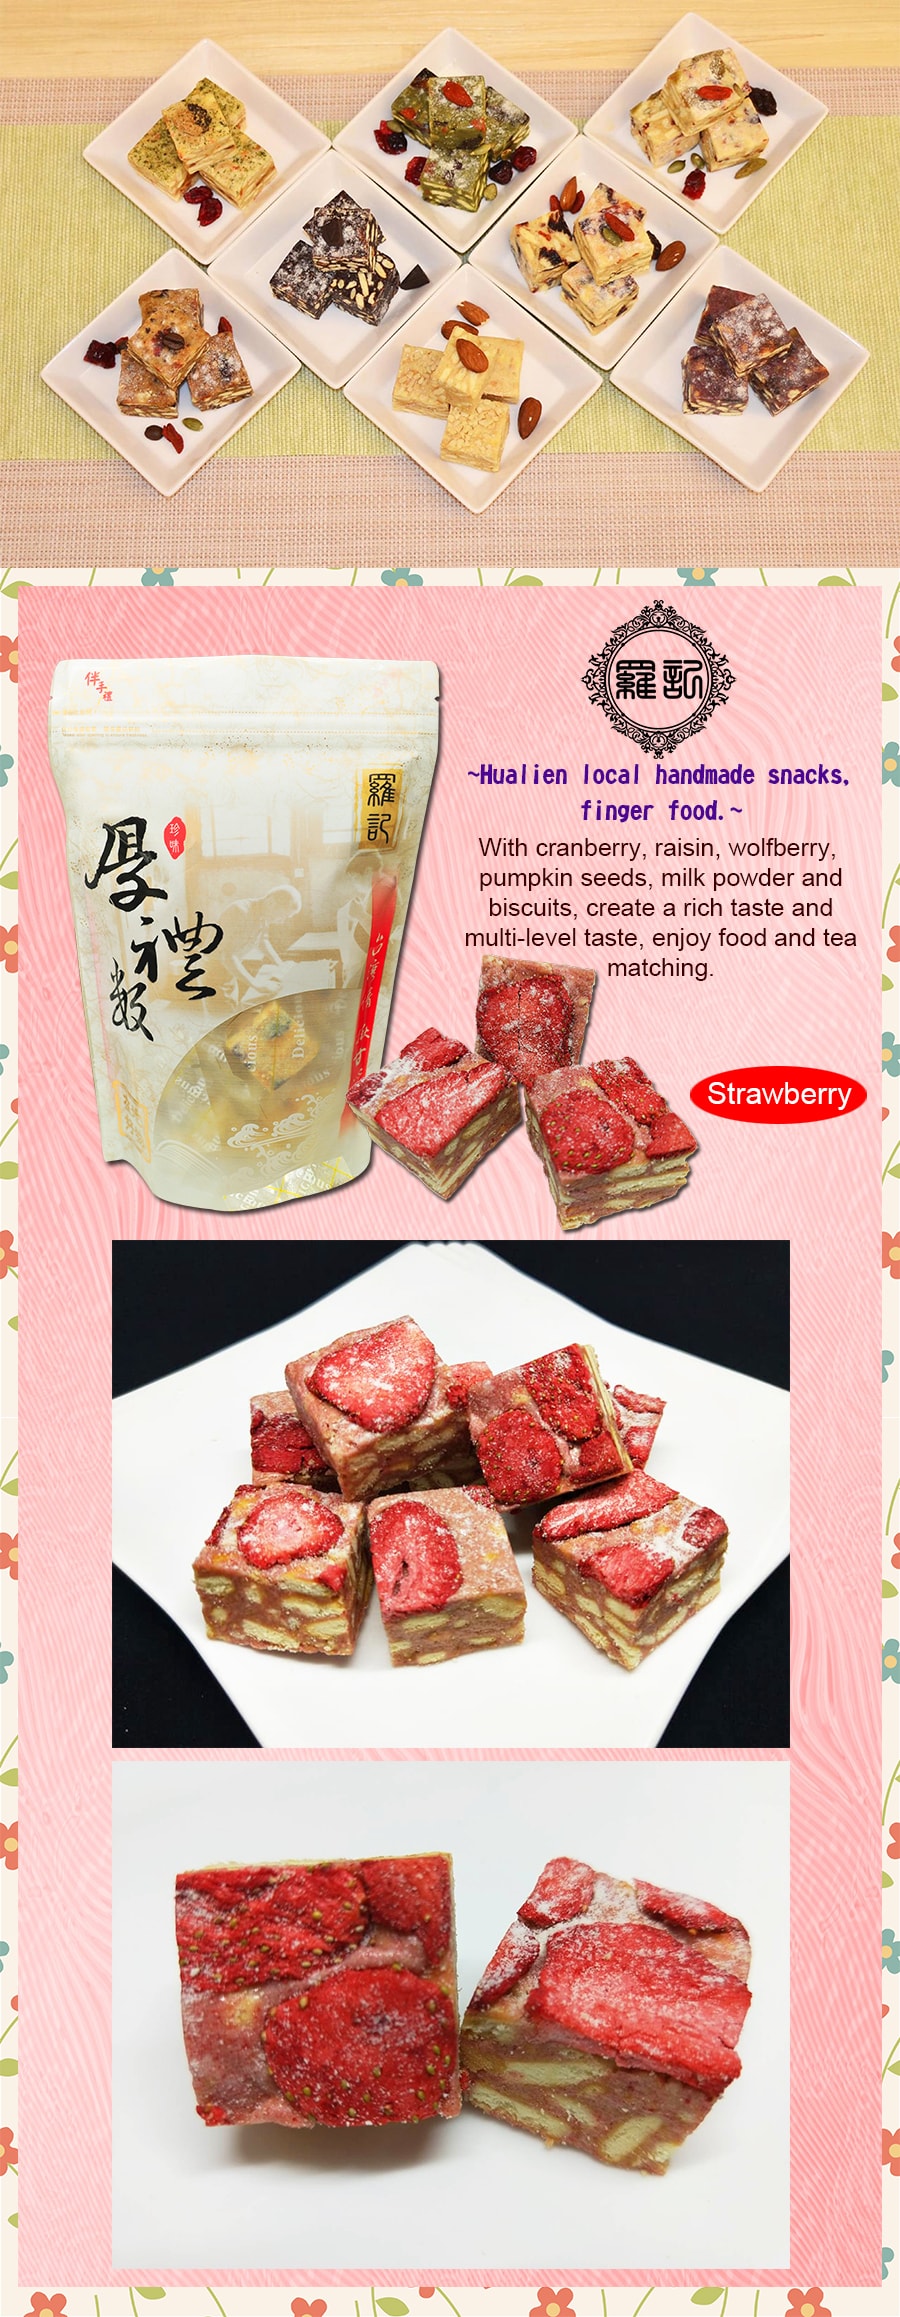 [Taiwan Direct Mail] Marshmallow biscuit(Strawberry)*Taiwan specialty/Gift/Tea time/Snacks*